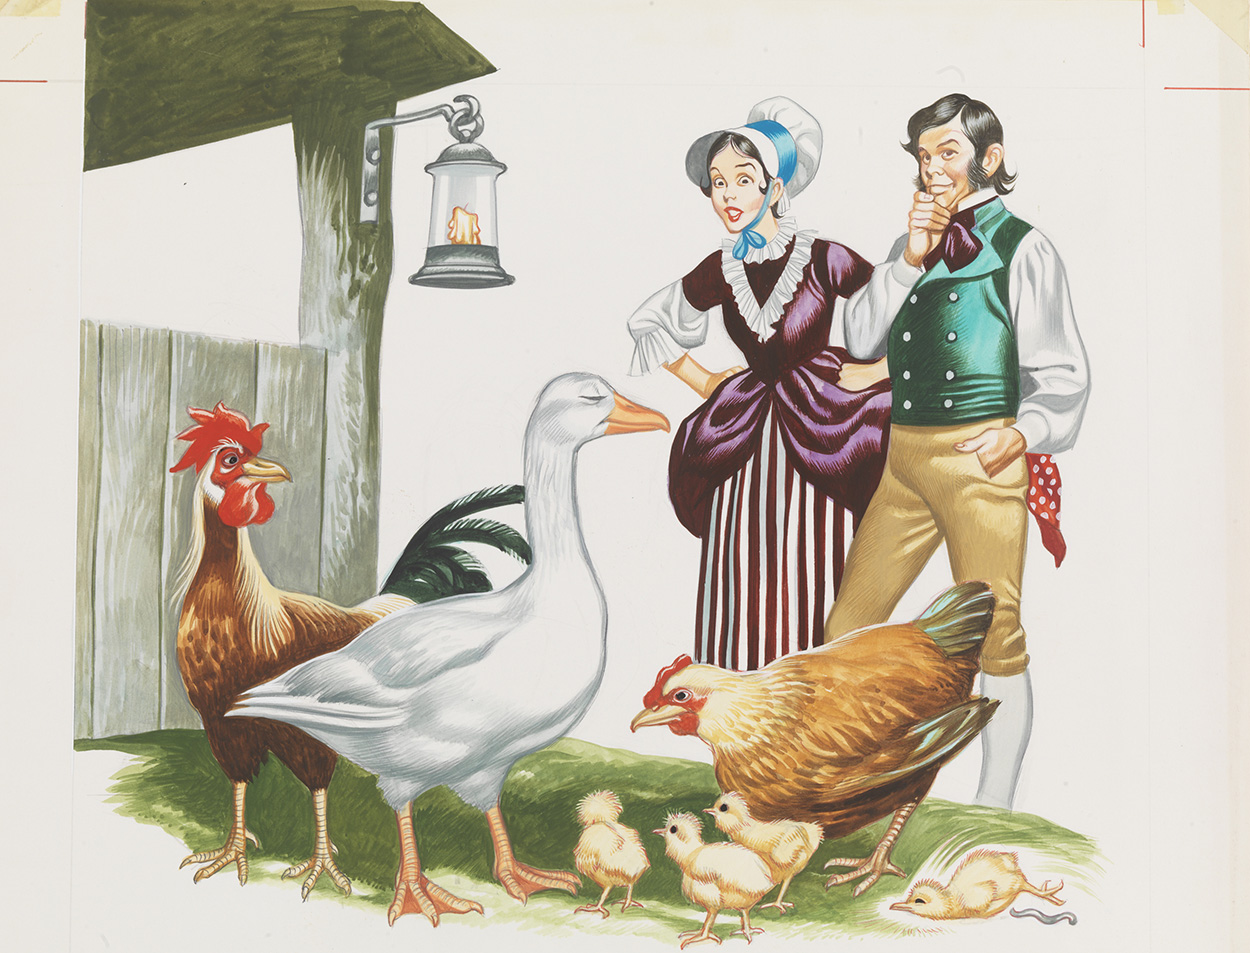 Aesop's Fables - The Goose and Chickens (Original) art by Aesop's Fables (Ron Embleton) at The Illustration Art Gallery